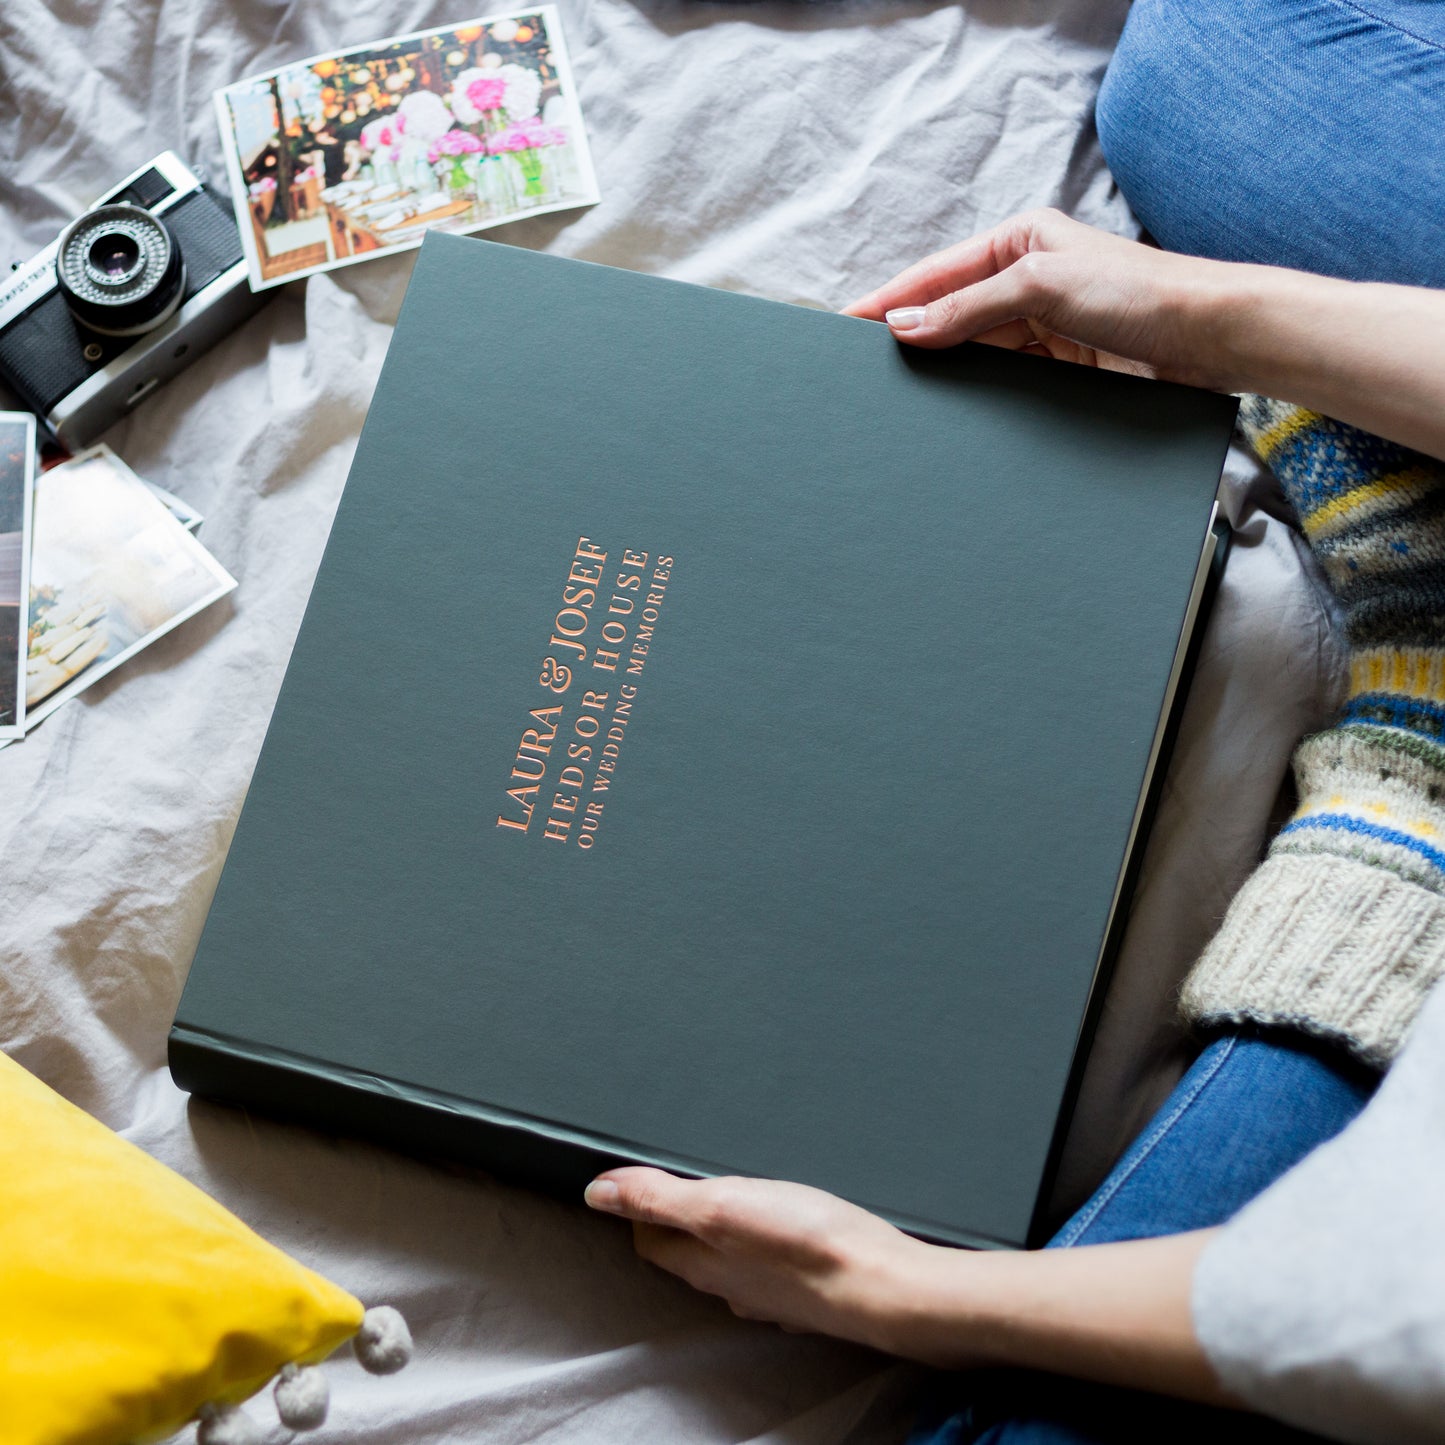 someone is sitting on a bed holding a large black wedding photo album . The wedding photo album has been printed on the front with a bride and groom's wedding details in a copper foil. There is also a camera and a set of photographs on the bed 